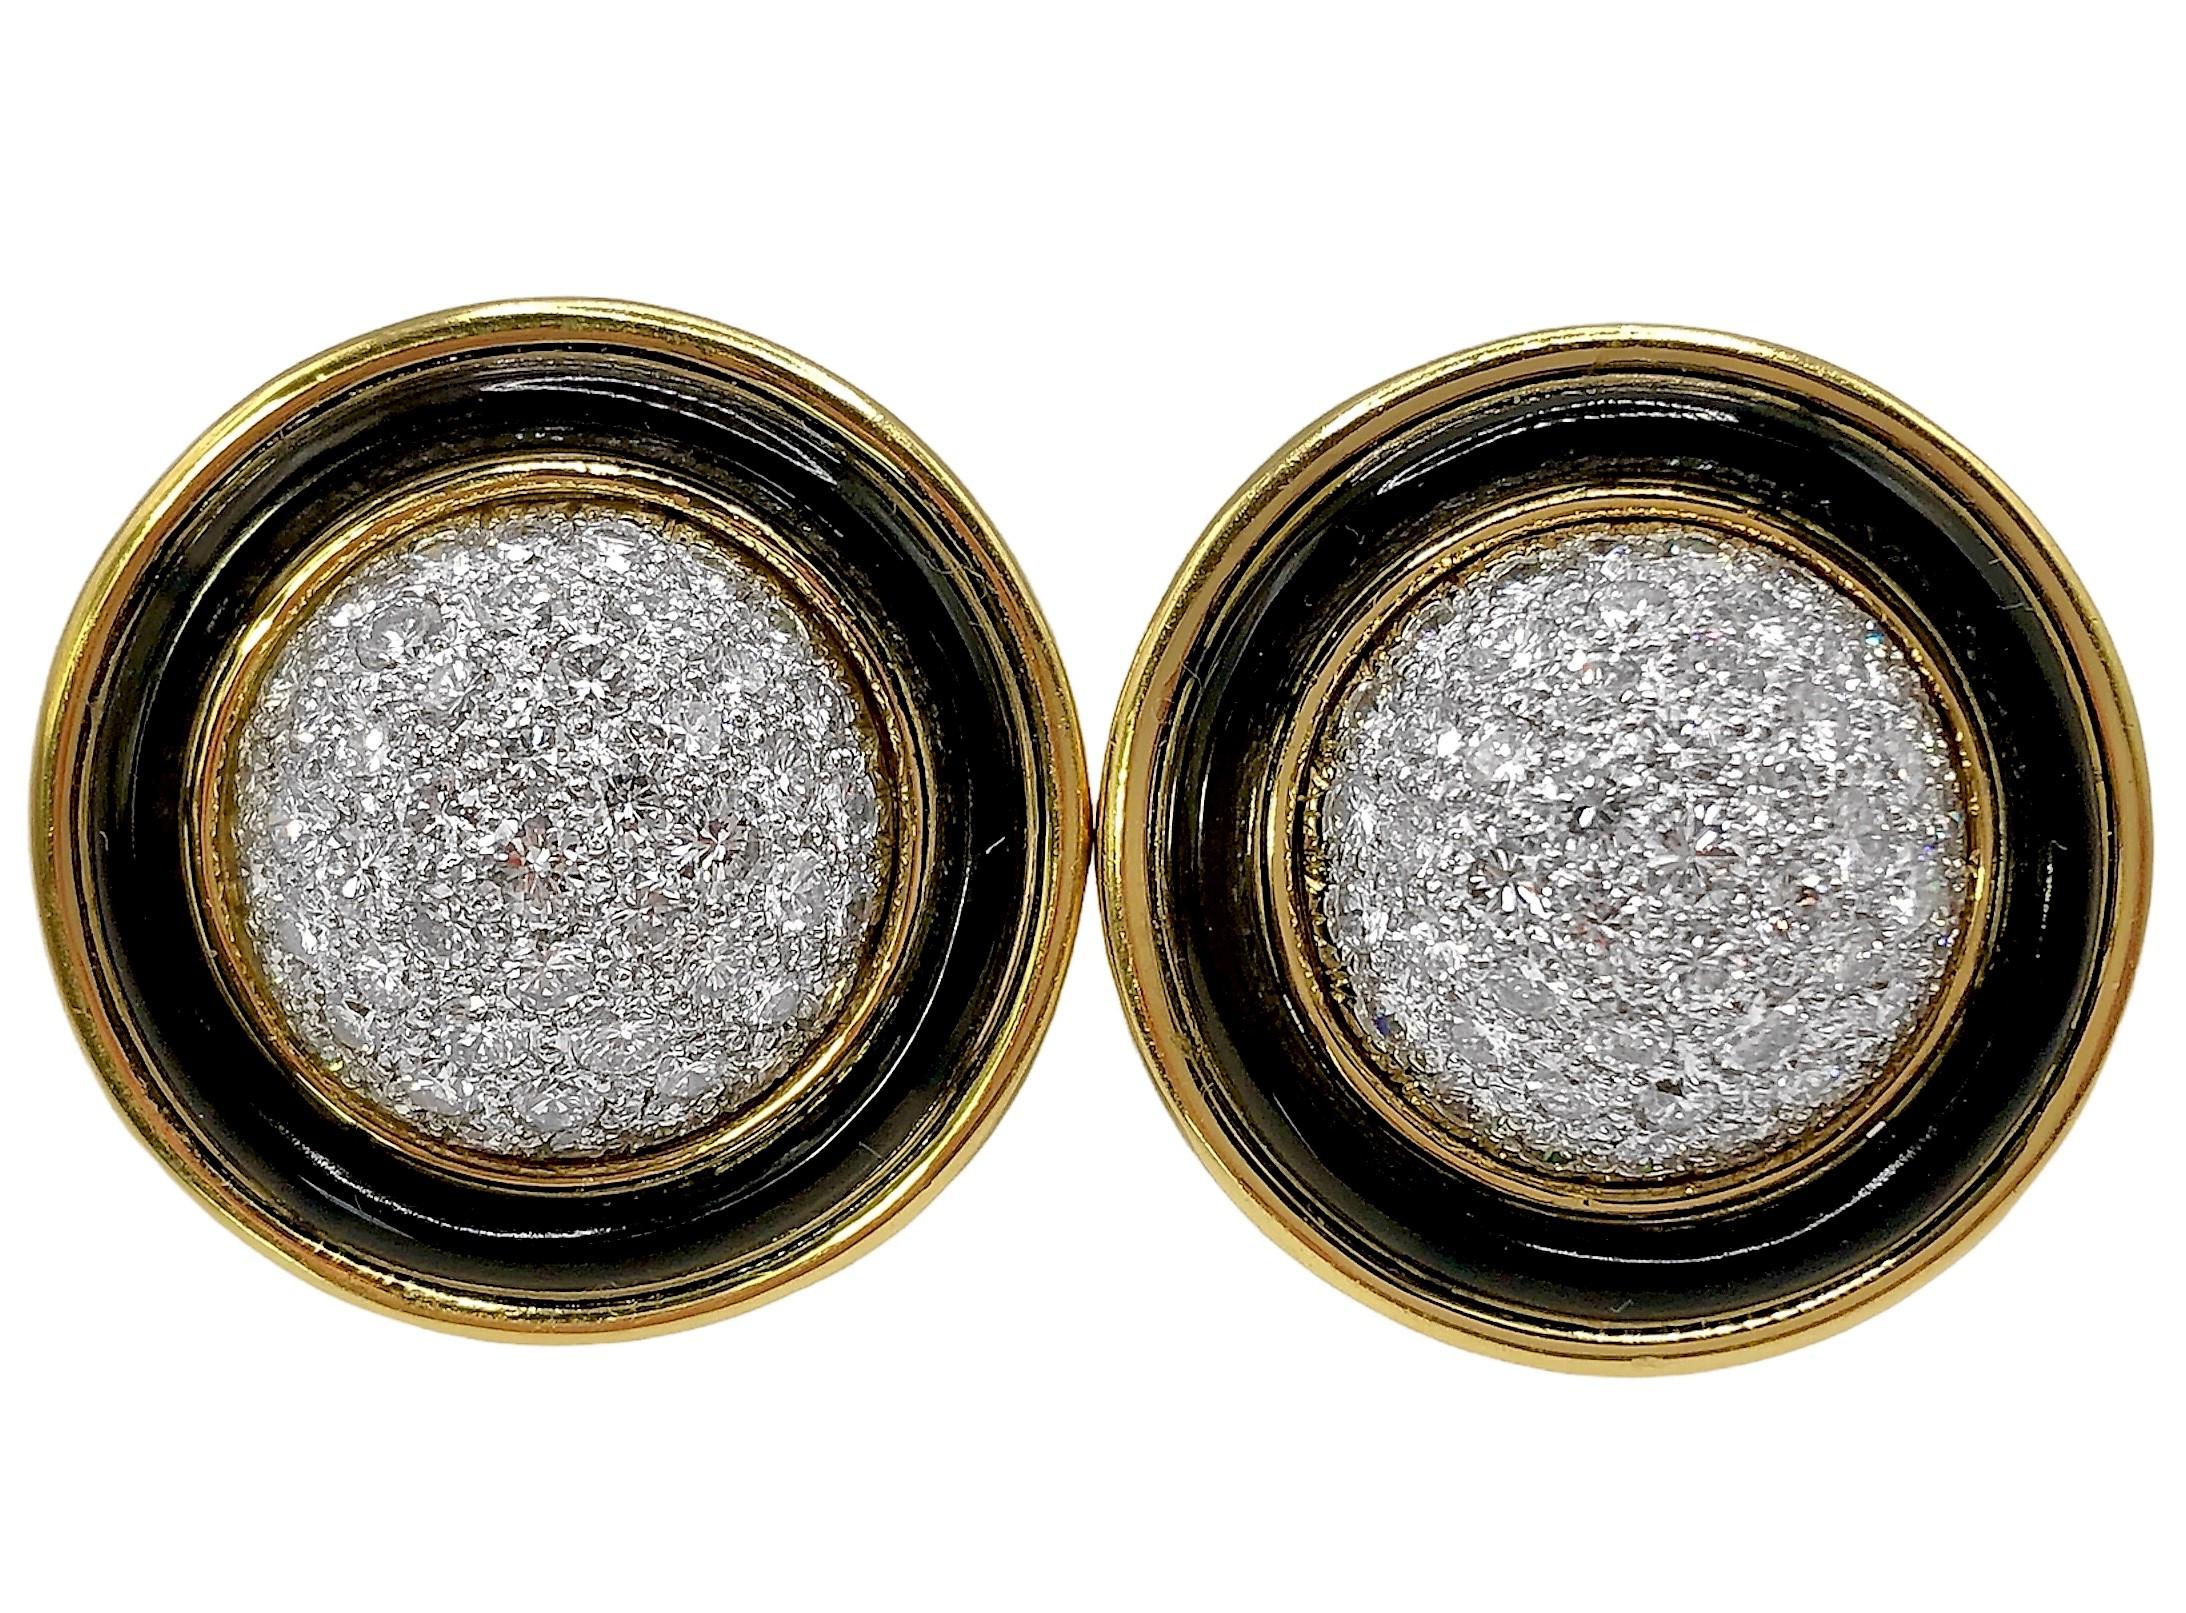 This imaginative and finely crafted pair of 18k gold and onyx button earrings are created from French azured platinum dome centers set with brilliant cut diamonds having a total approximate weight of 7.50ct of overall F/G color and VS1 clarity.